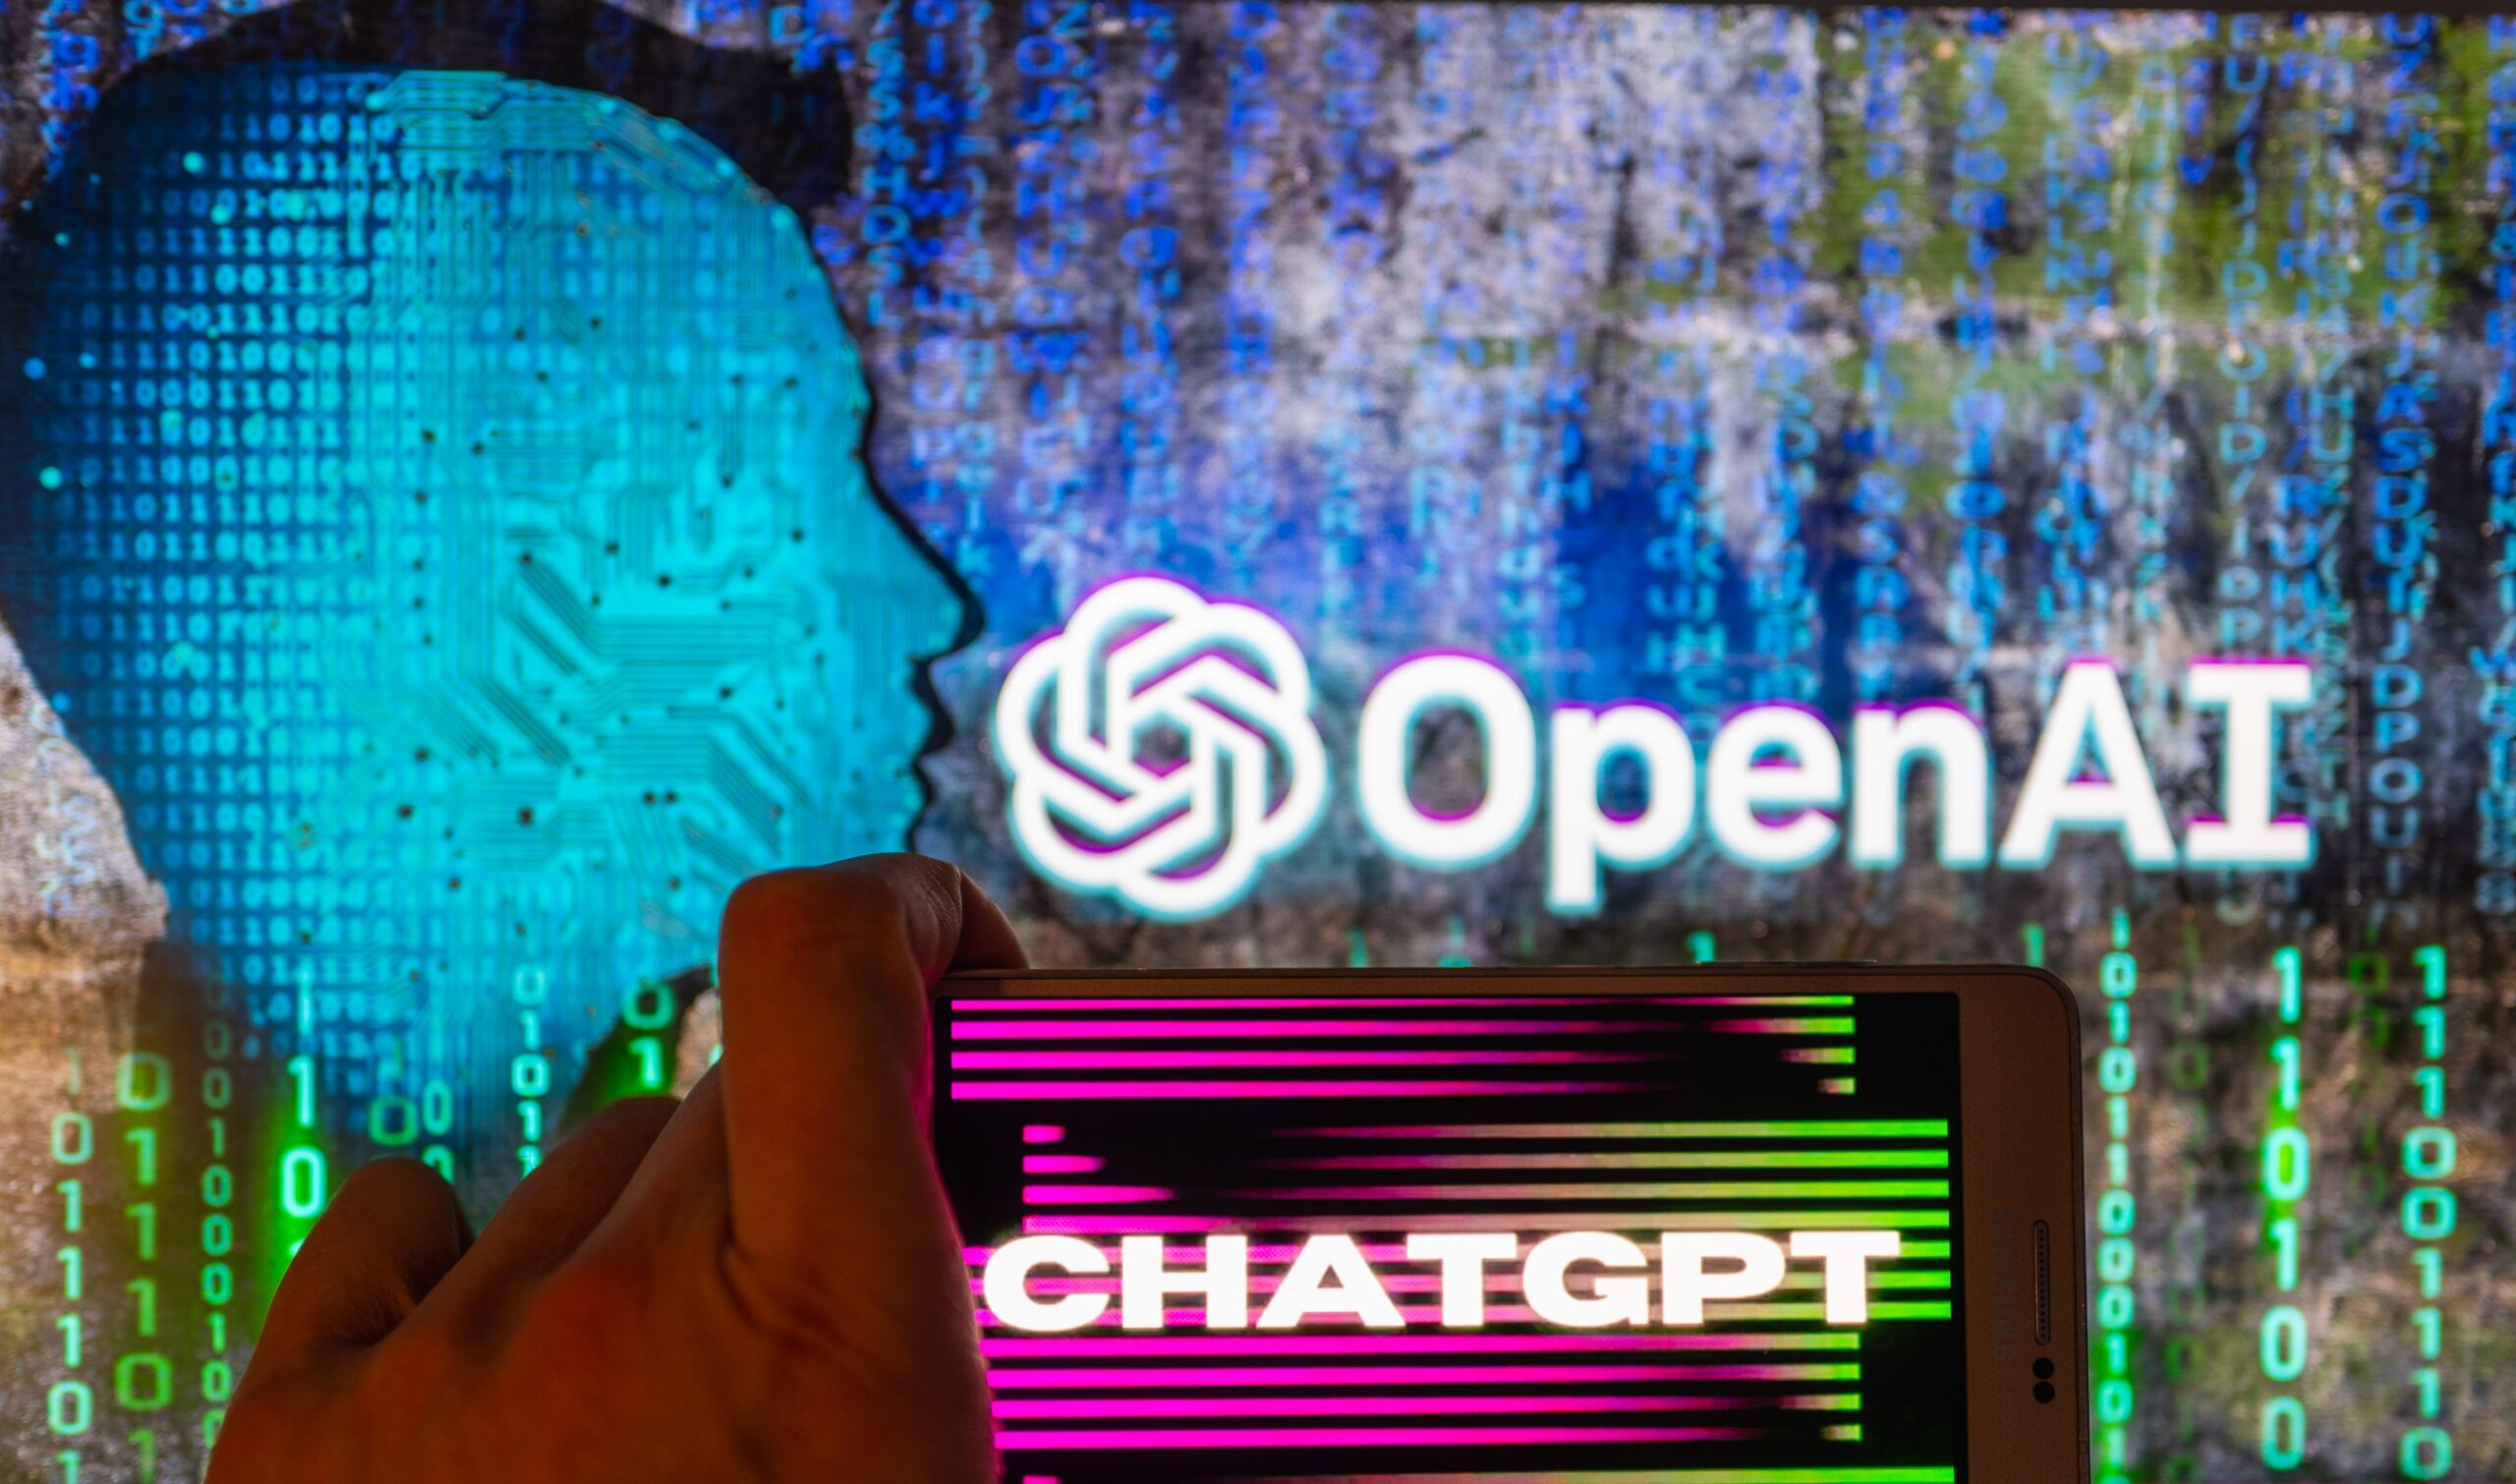 An image of a phone with ChatGPT and OpenAI&#39;s logo visible.